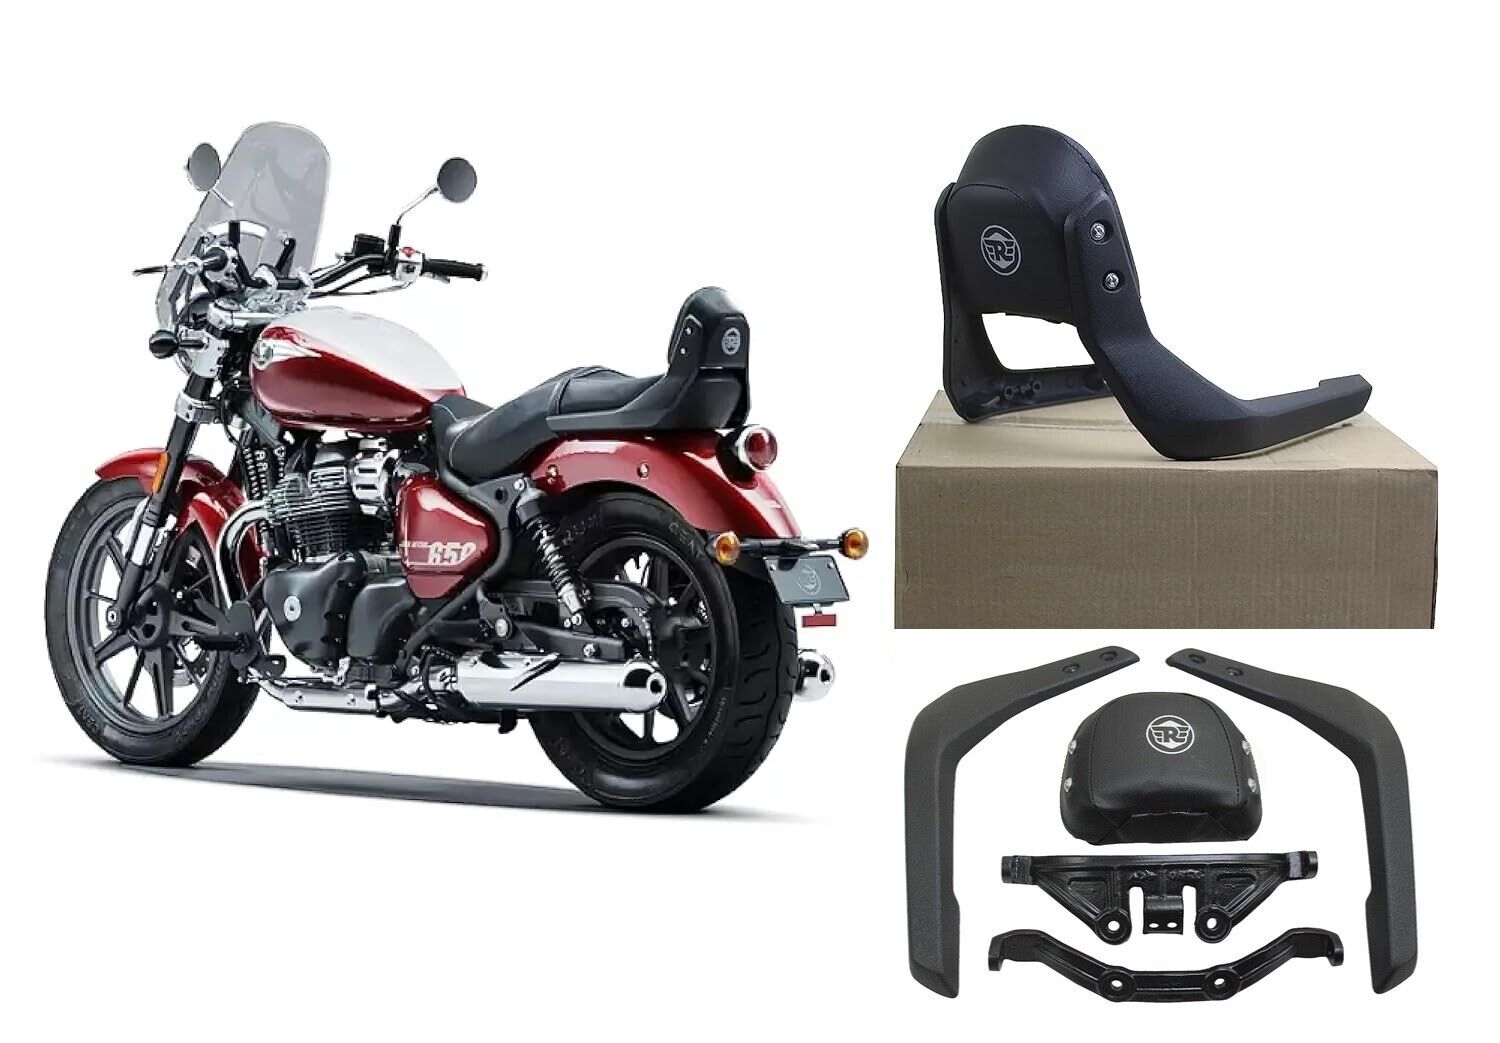 BACKREST WITH PAD Fit For Royal Enfield Super Meteor 650